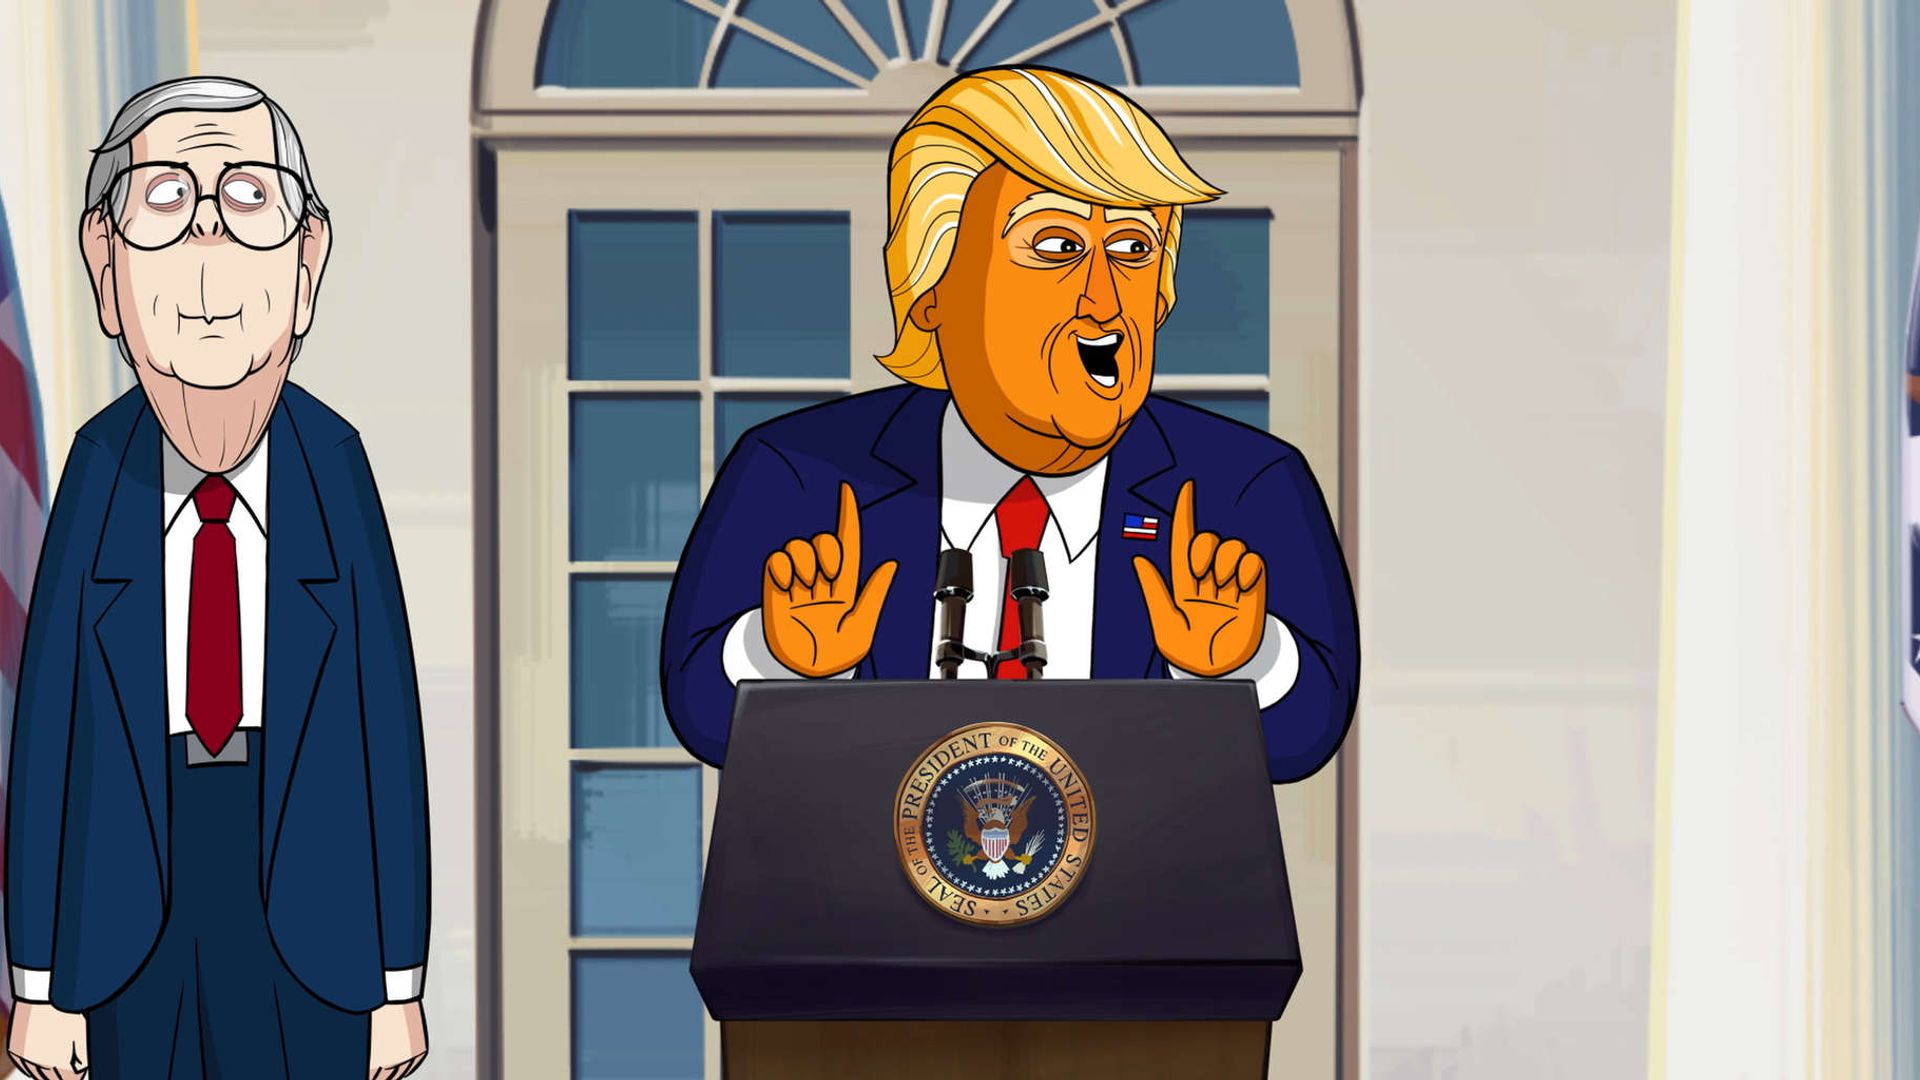 Our Cartoon President background